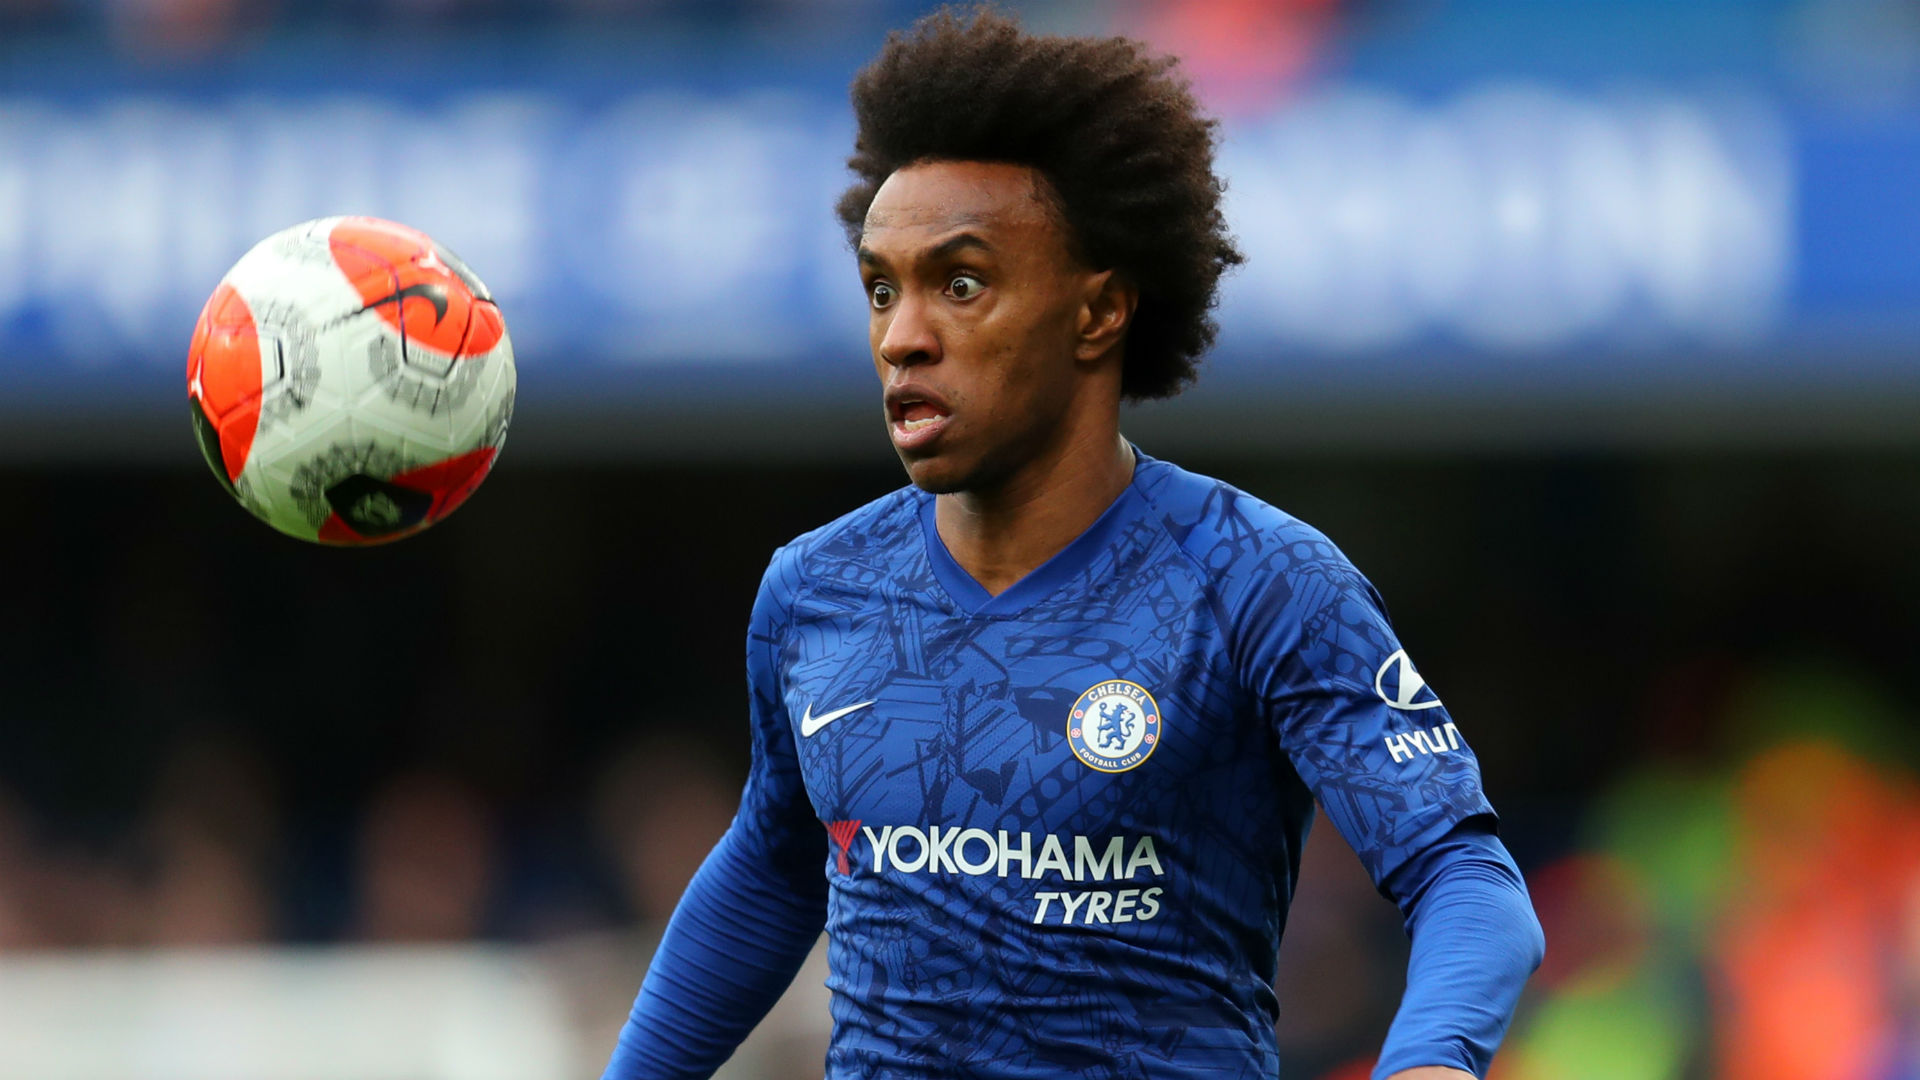 Willian's future at Chelsea is shrouded in doubt, but boss Frank Lampard insists contract talks are "ongoing".